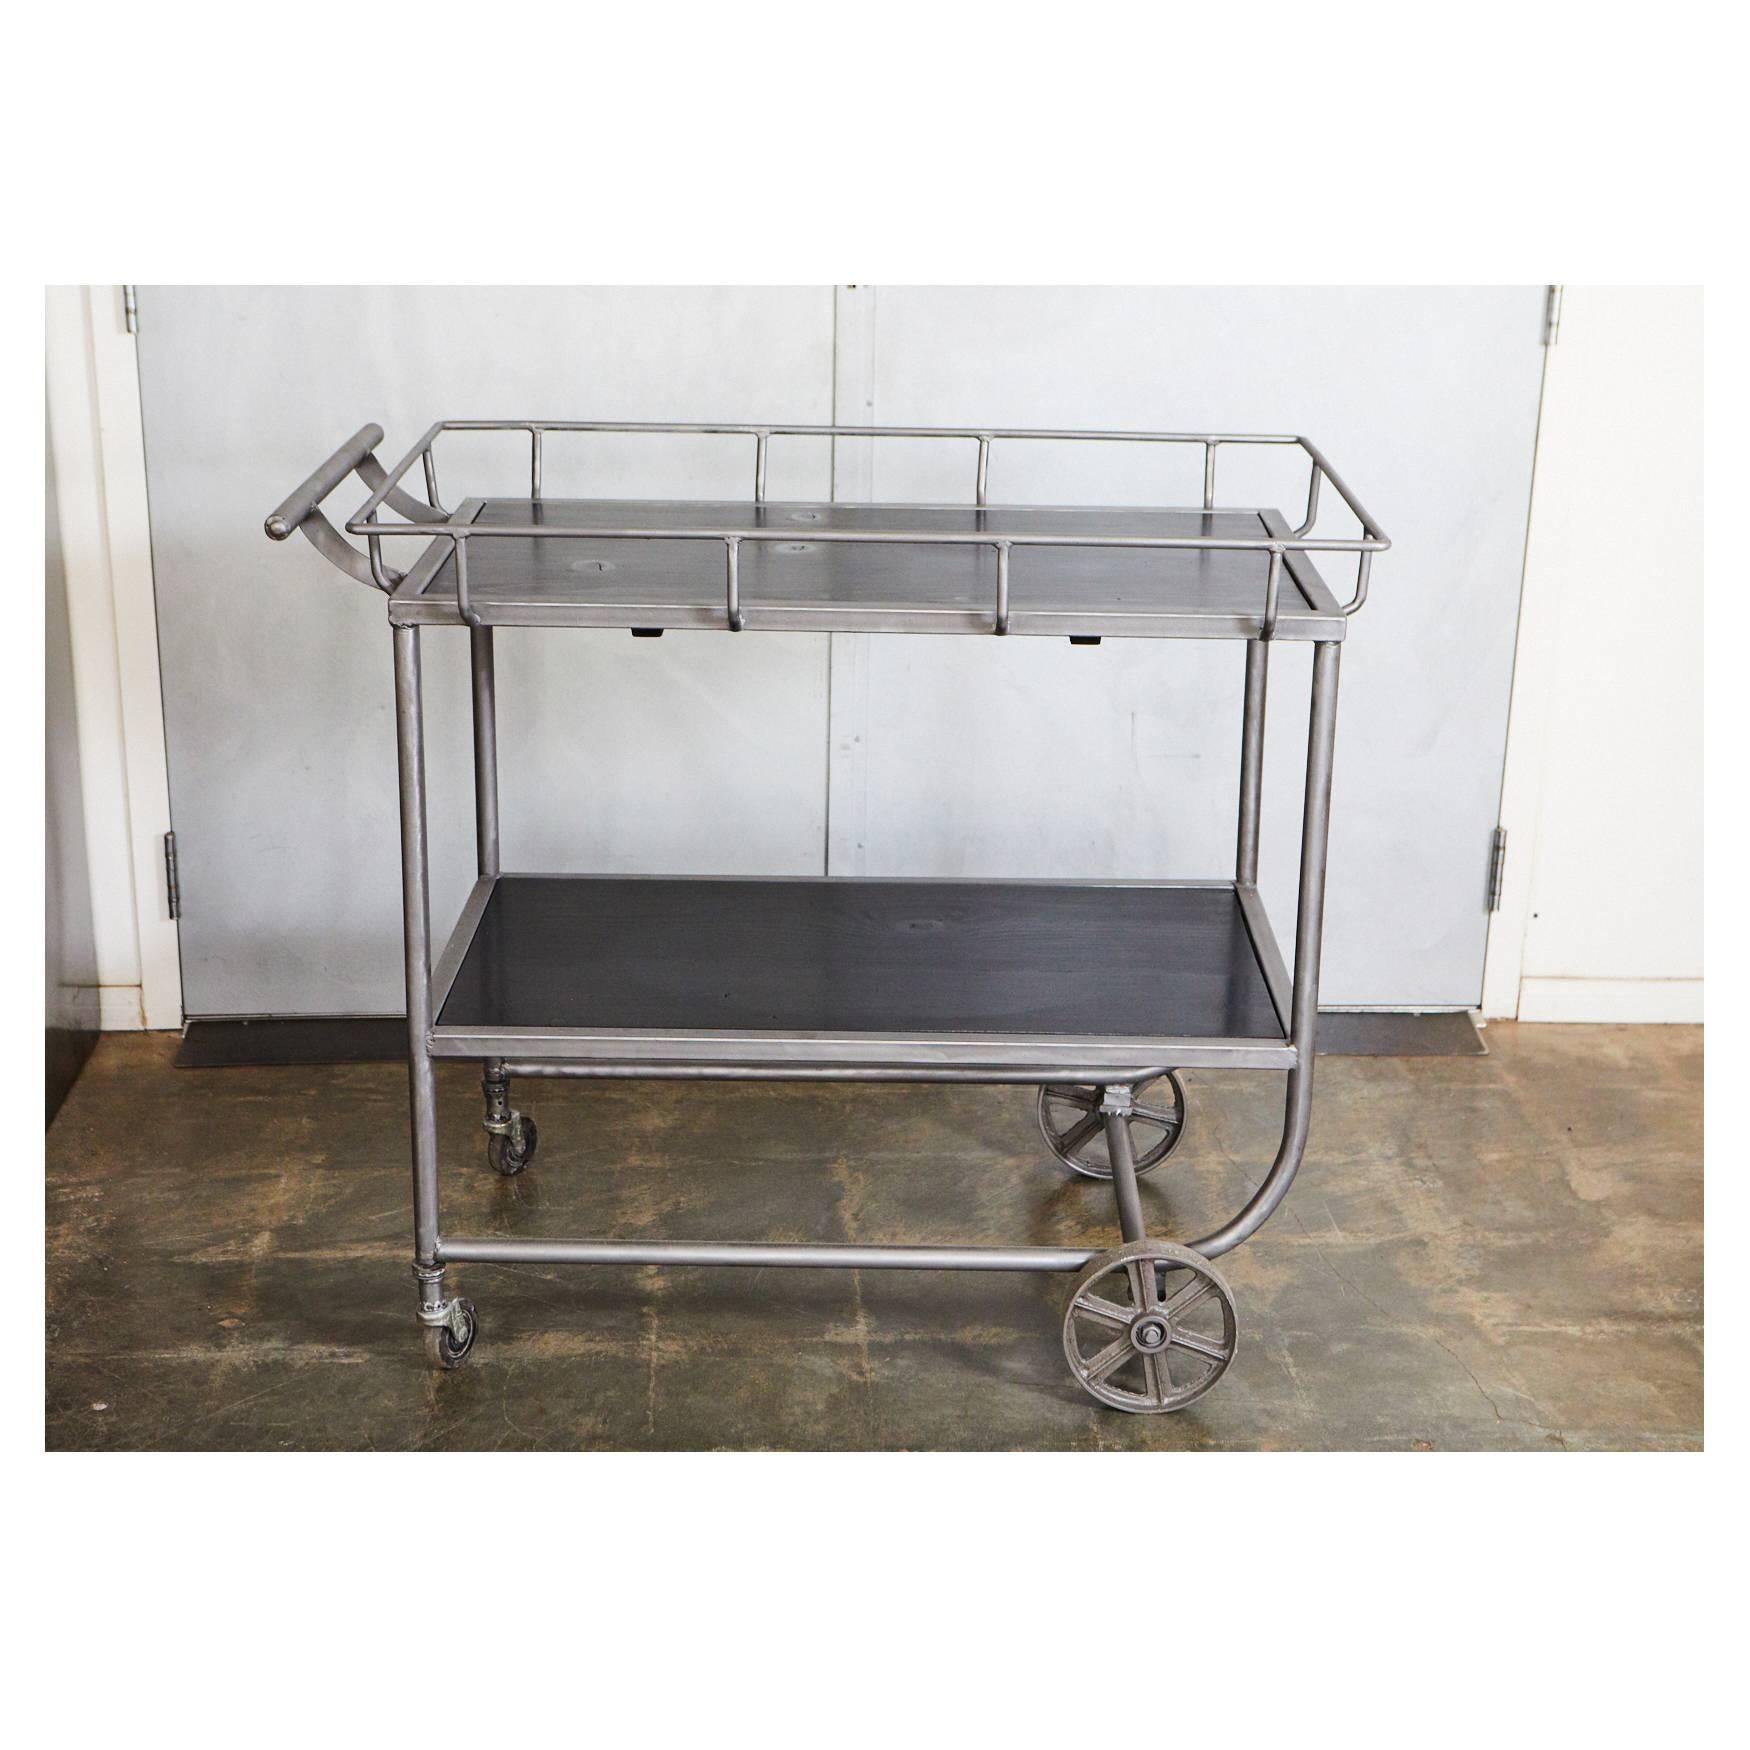 This industrial bar cart has a inset ebony stained wood top and lower shelf. The cart has a push handle, a distinctive gallery made of metal bars and Industrial oversized wheels at the front end making it ideal for entertaining, storage and display